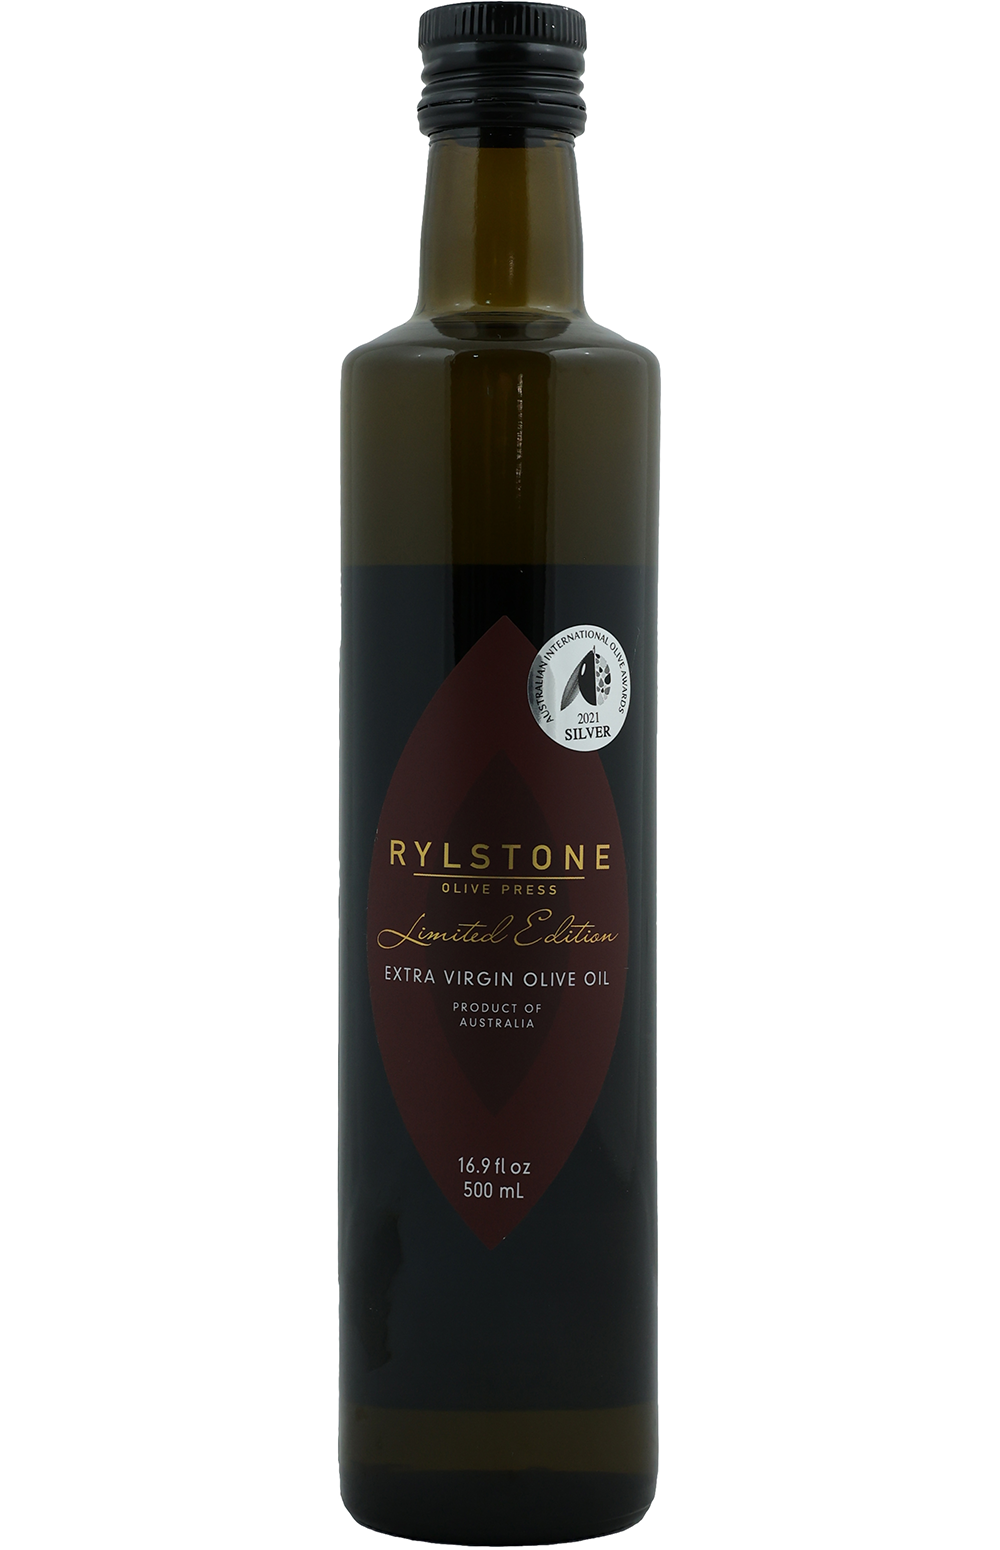 Rylstone Olive Press Limited Edition